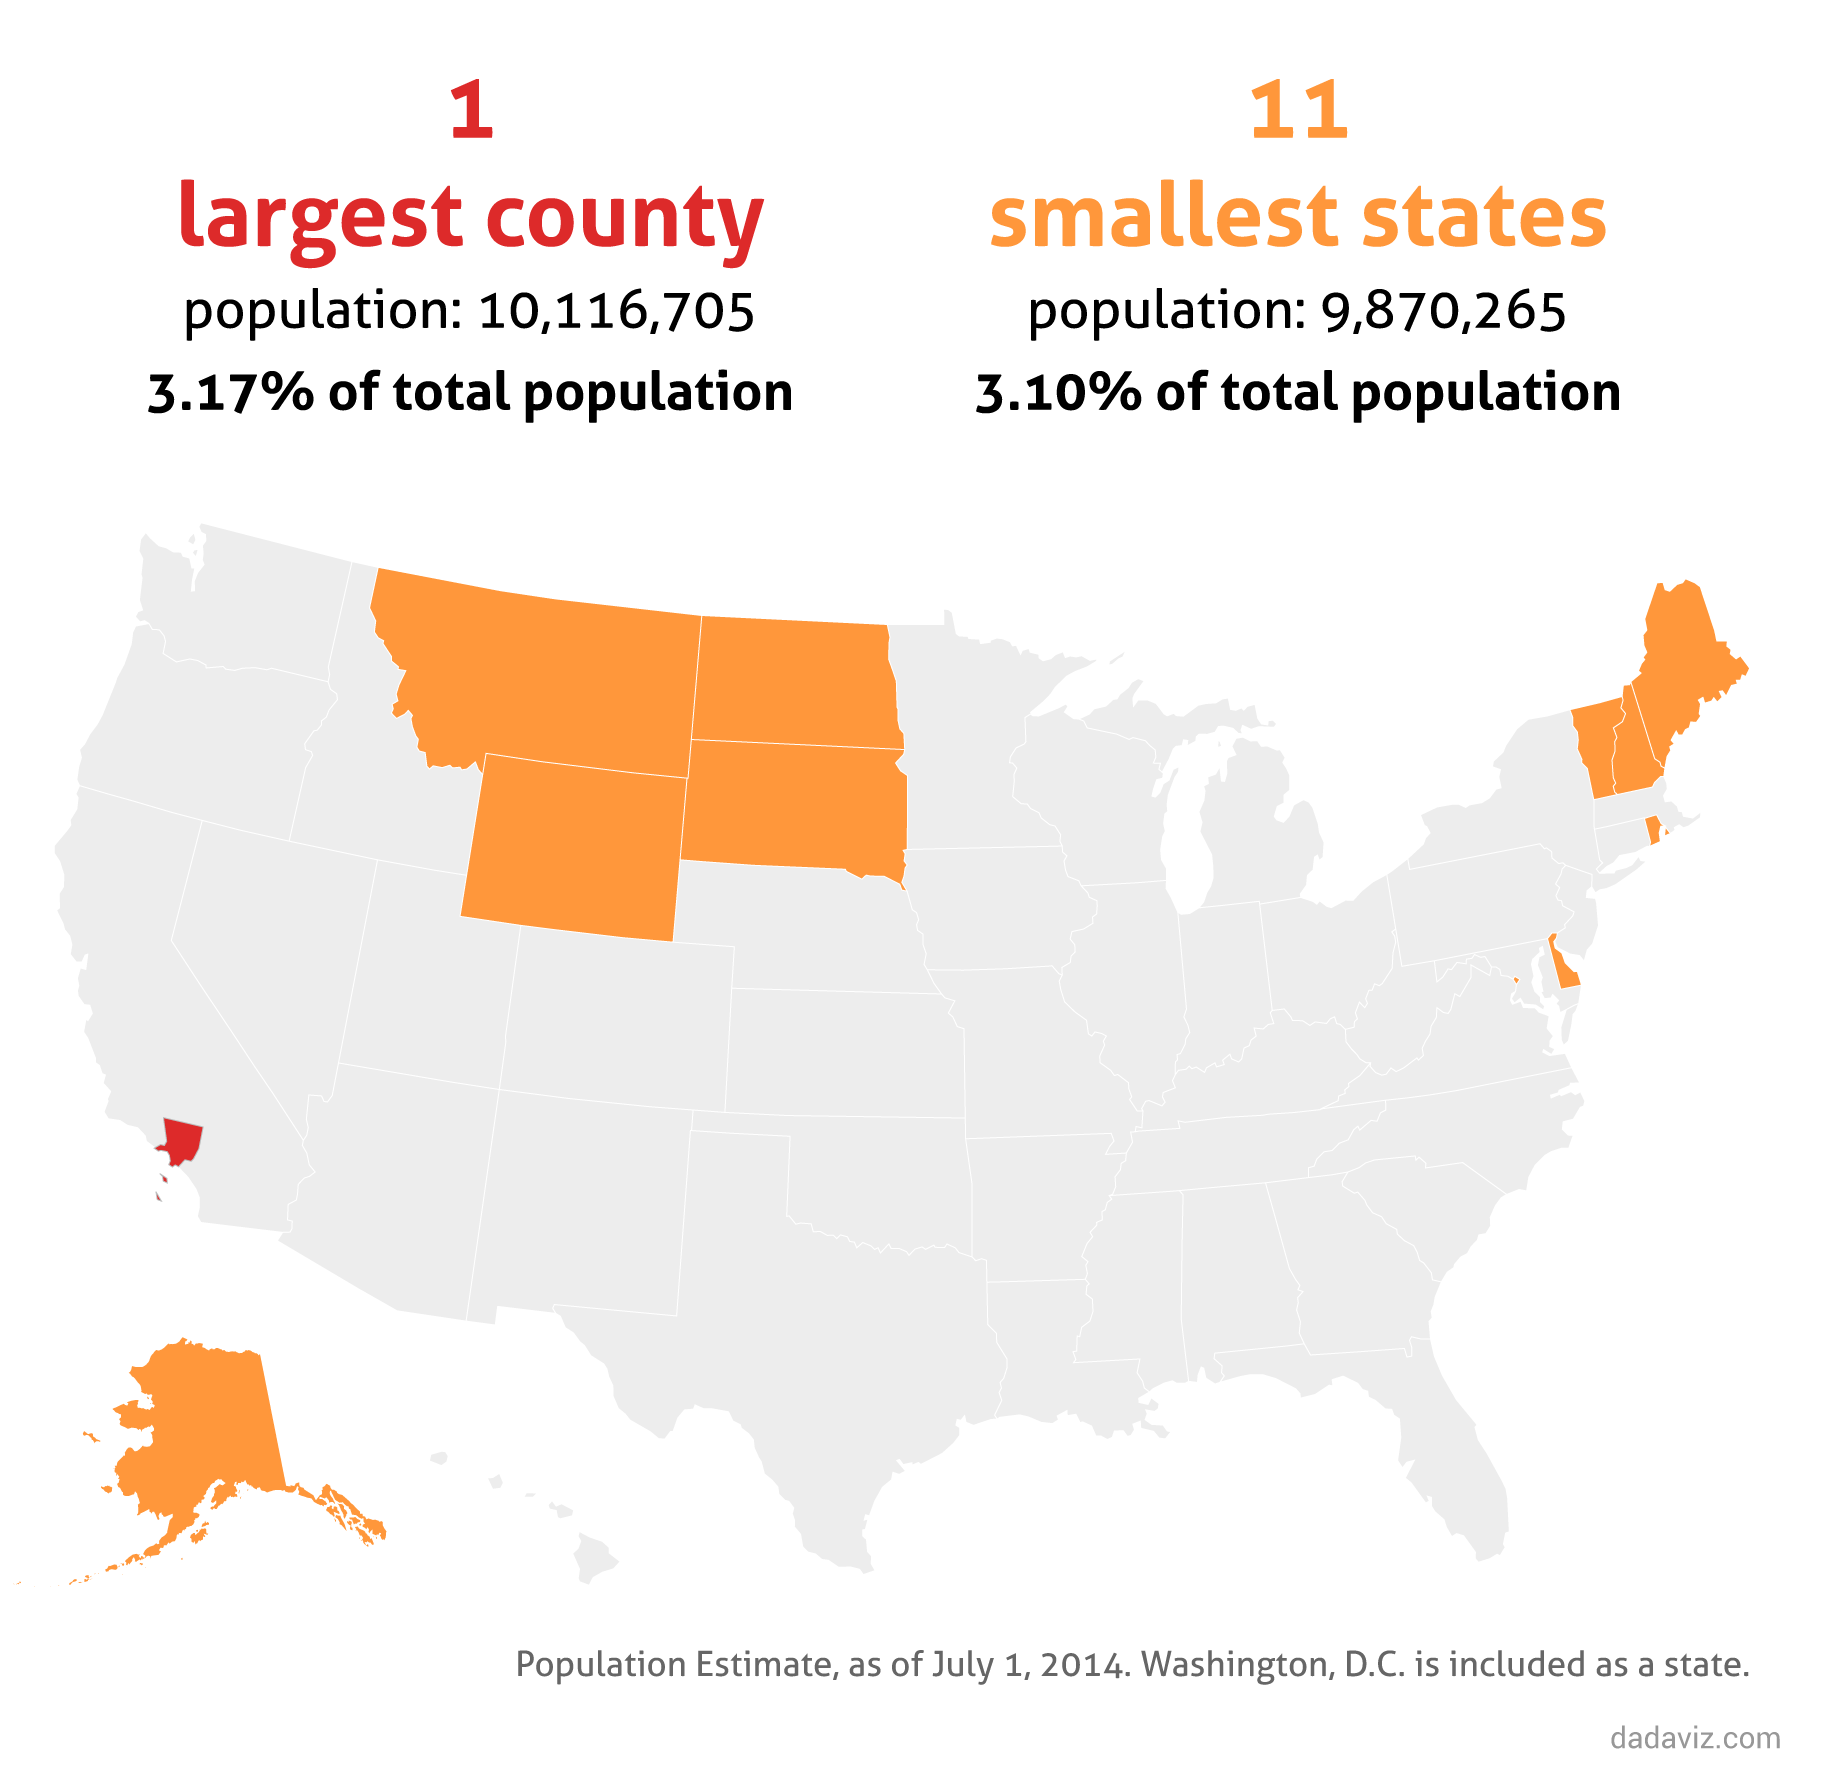 The 144 largest counties account for 50% of total population